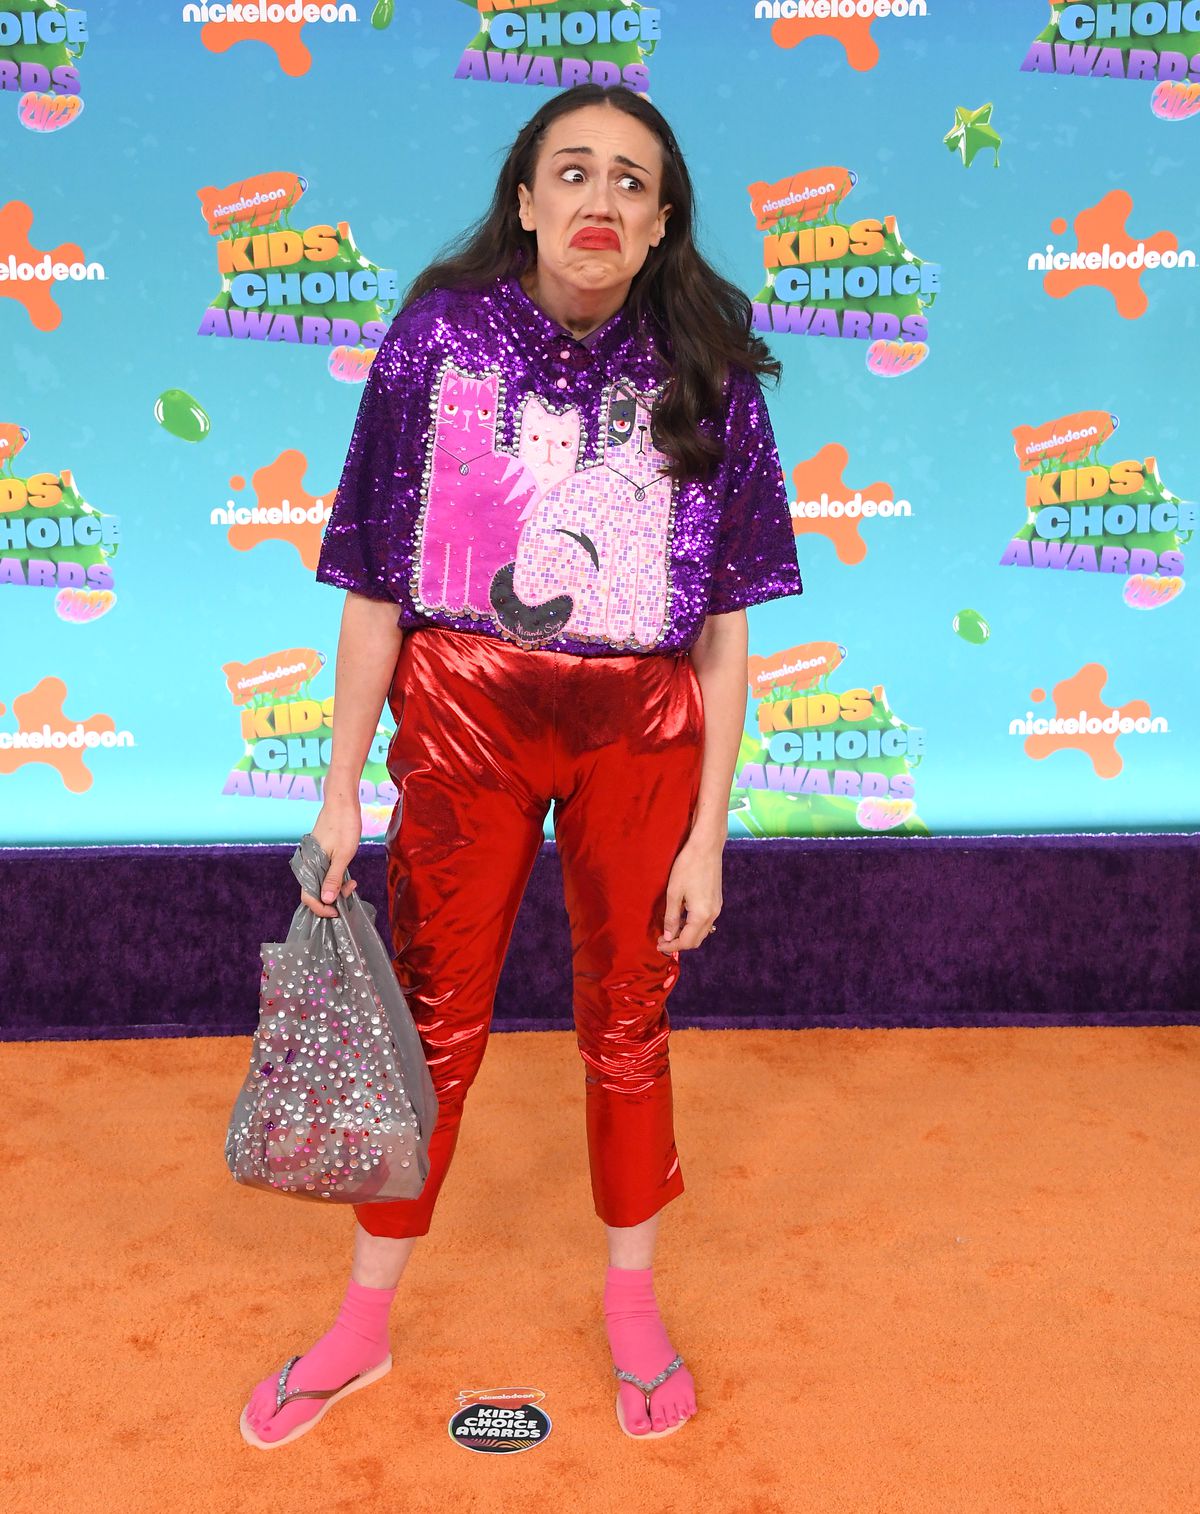 Colleen Ballinger dressed in character as Miranda Sings at the 2023 Kids’ Choice Awards. She’s wearing a sequined cat top, shiny red pants pulled up, and pink socks with flip-flops.